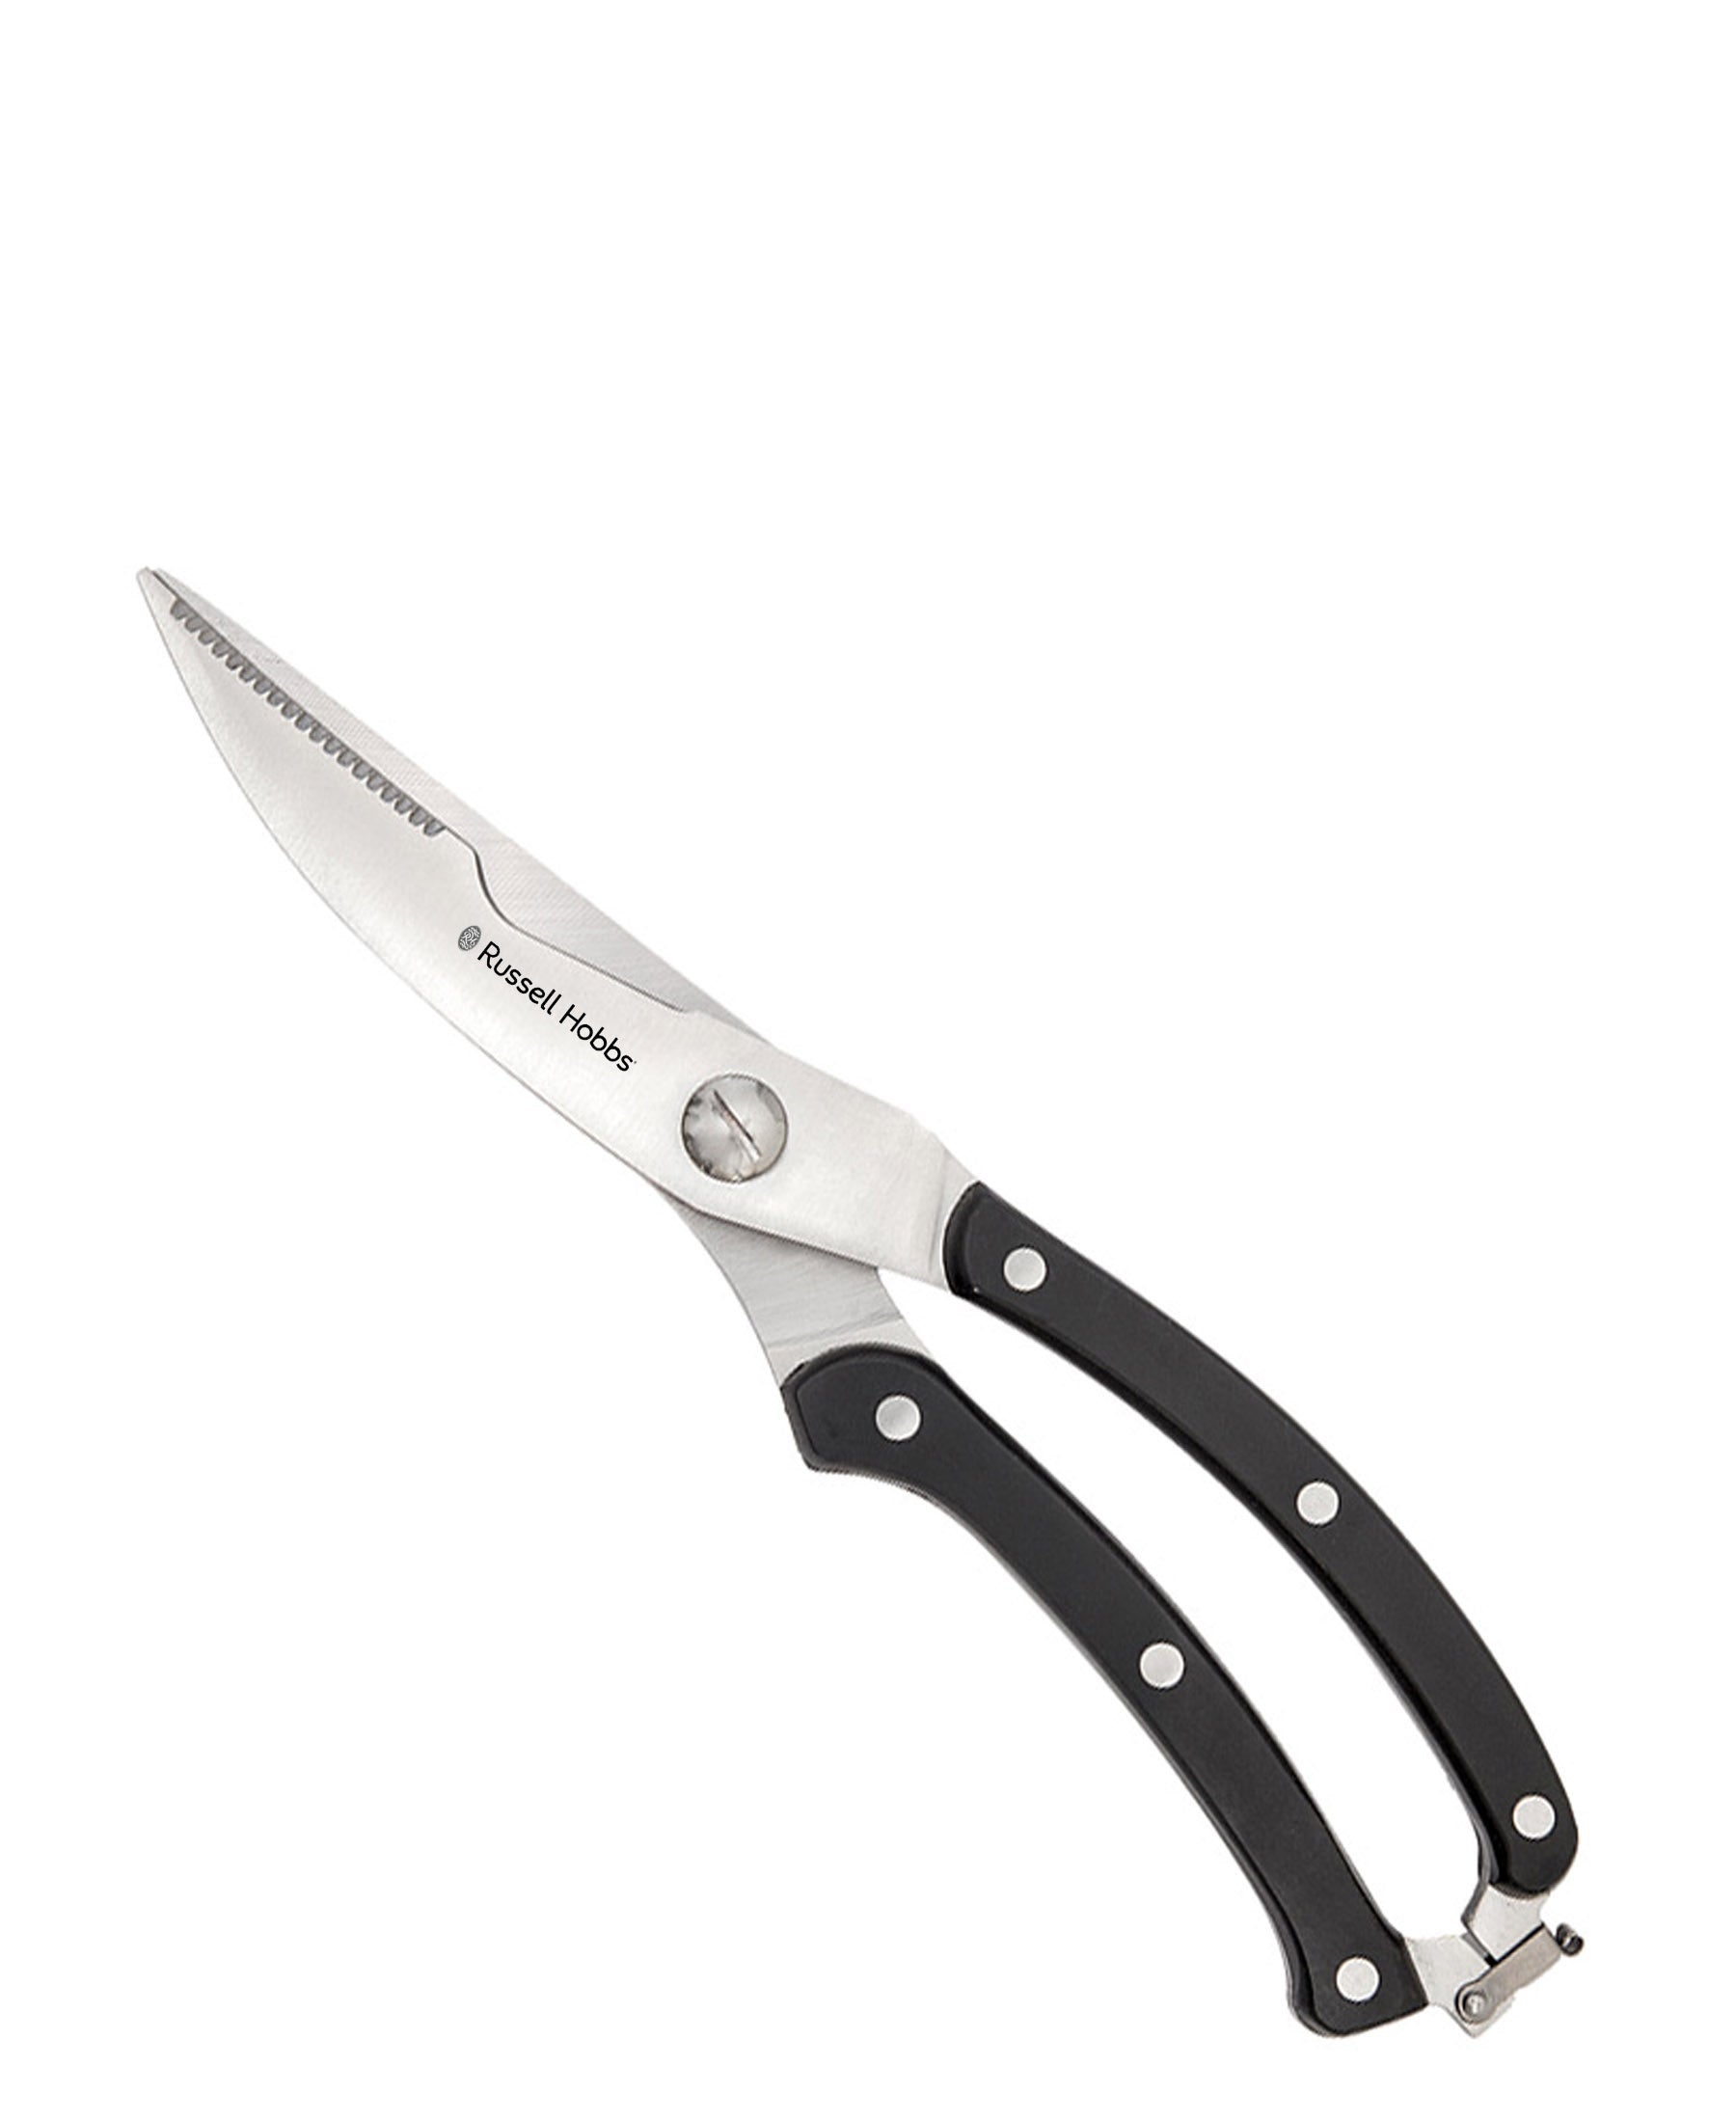 Russell Hobbs Classique Stainless Steel Springload Poultry Shears - Silver